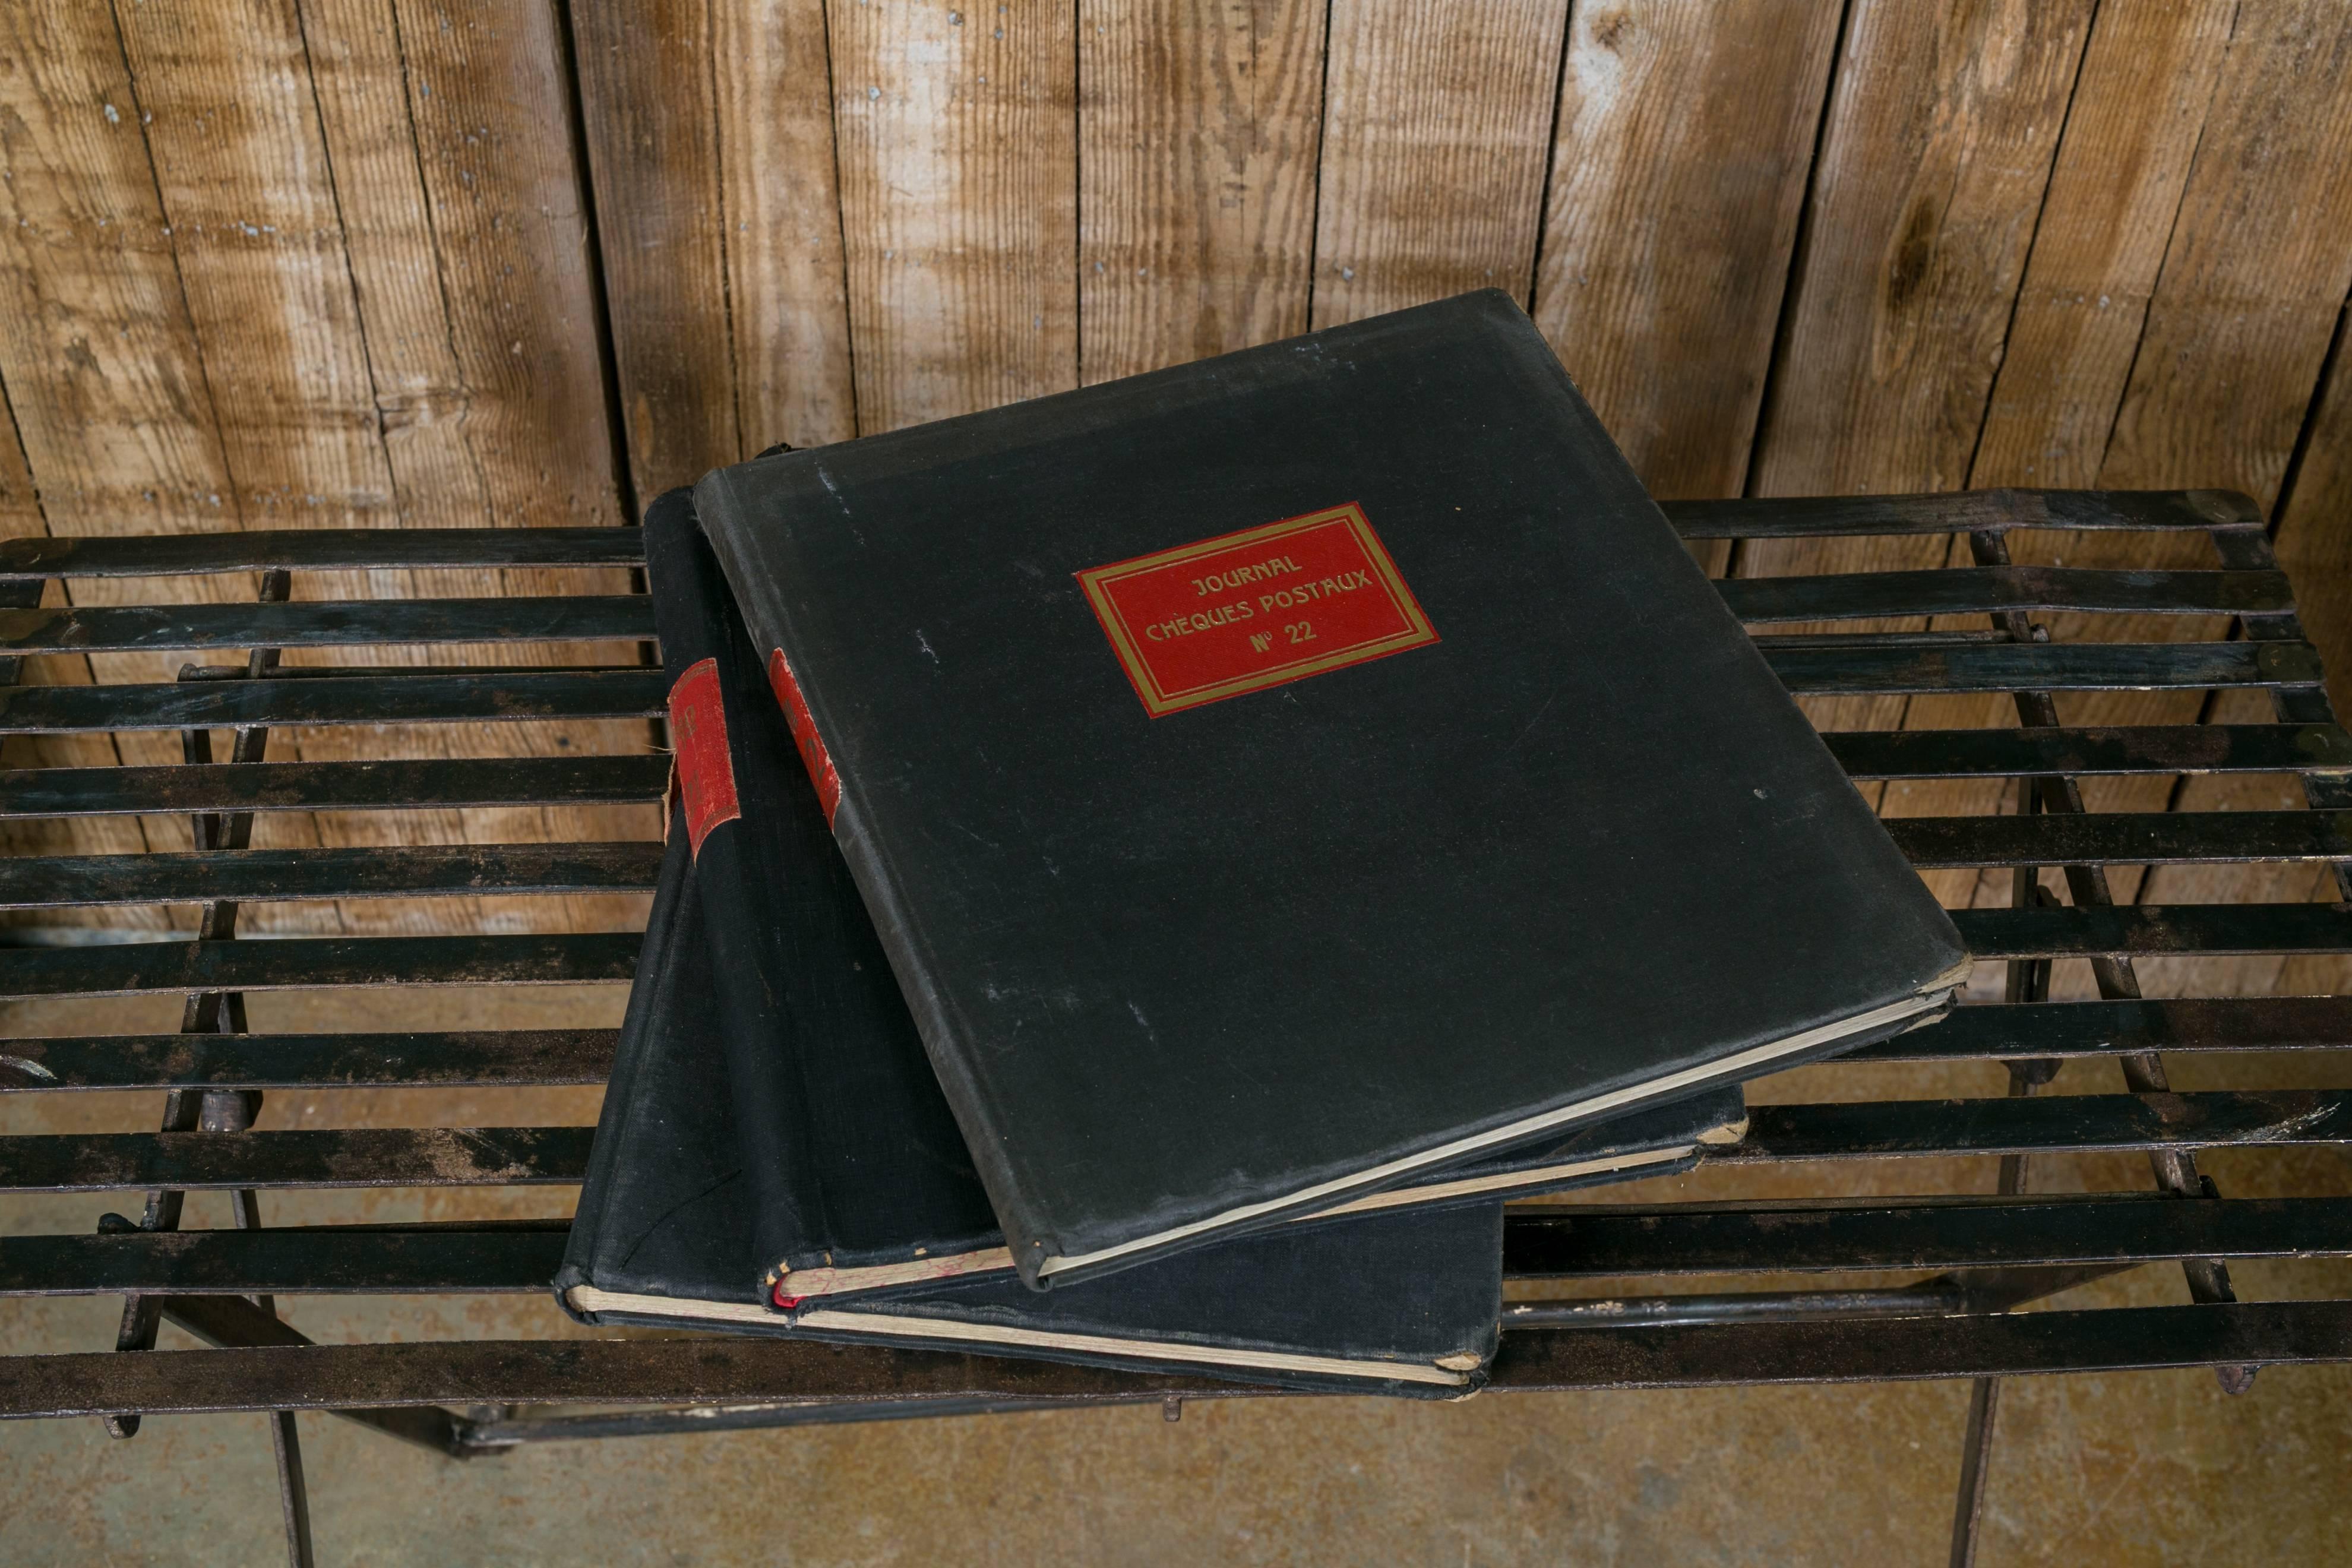 Belgian Set of Three Black and Red Ledgers from Belgium, circa 1930s-1960s